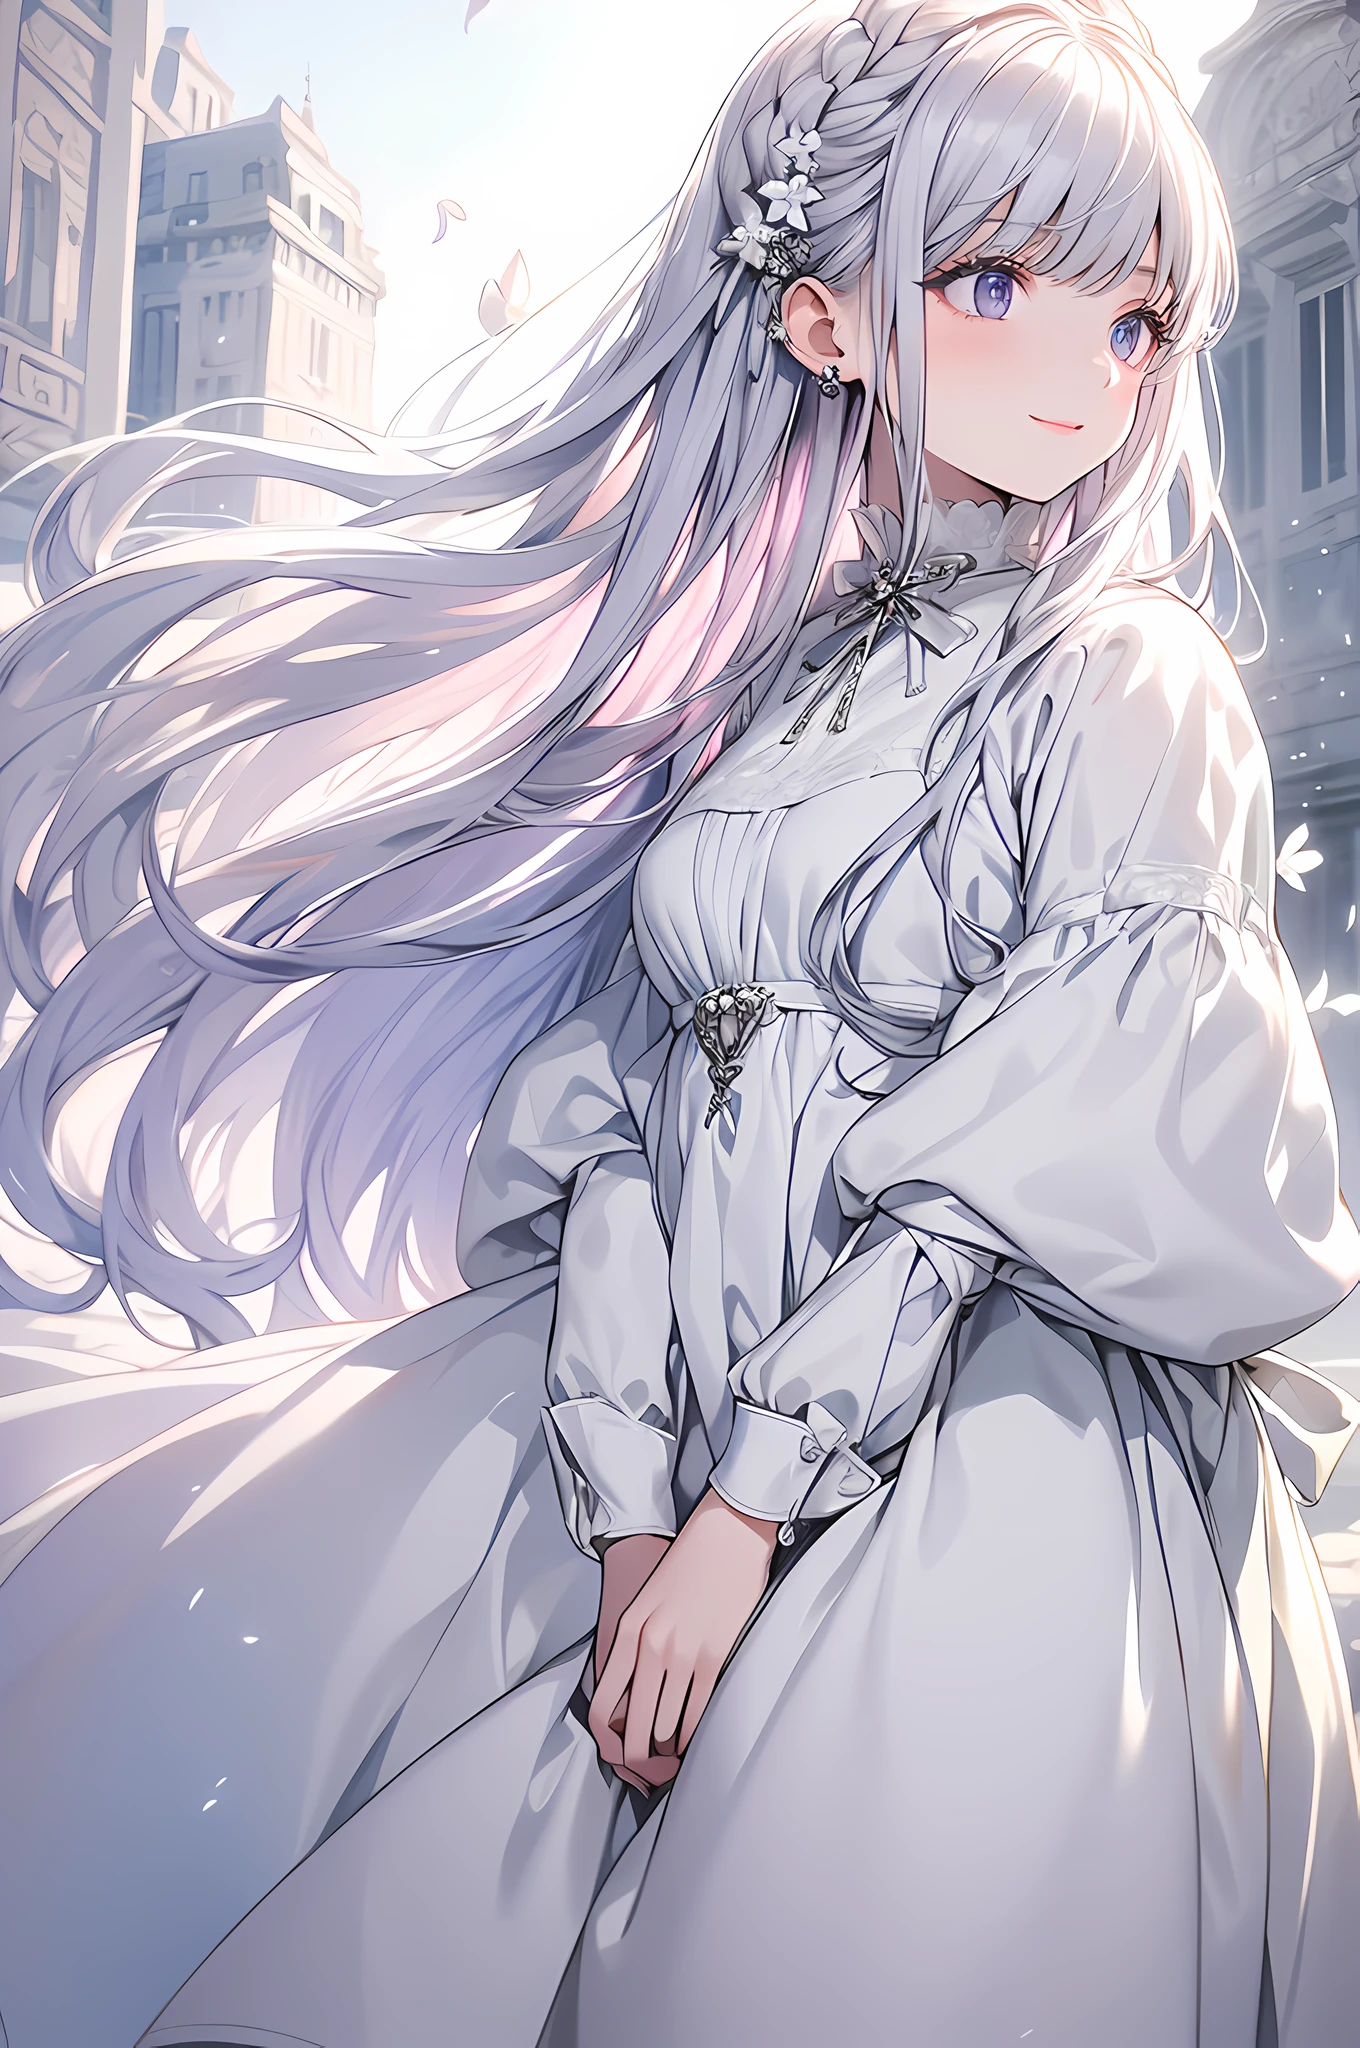 Masterpiece, Superb work, Daytime, En plein air, Falling flowers, White dress, 1 girl, Perfect woman, Silver-white long-haired woman, grey blue eyes, Pale pink lips, Cold, Serious, Bang, Purple eyes, White clothes, Black clothing collection, Delicate face, exquisite face, Standing bow, nipple tassels, Happy knot, Smile